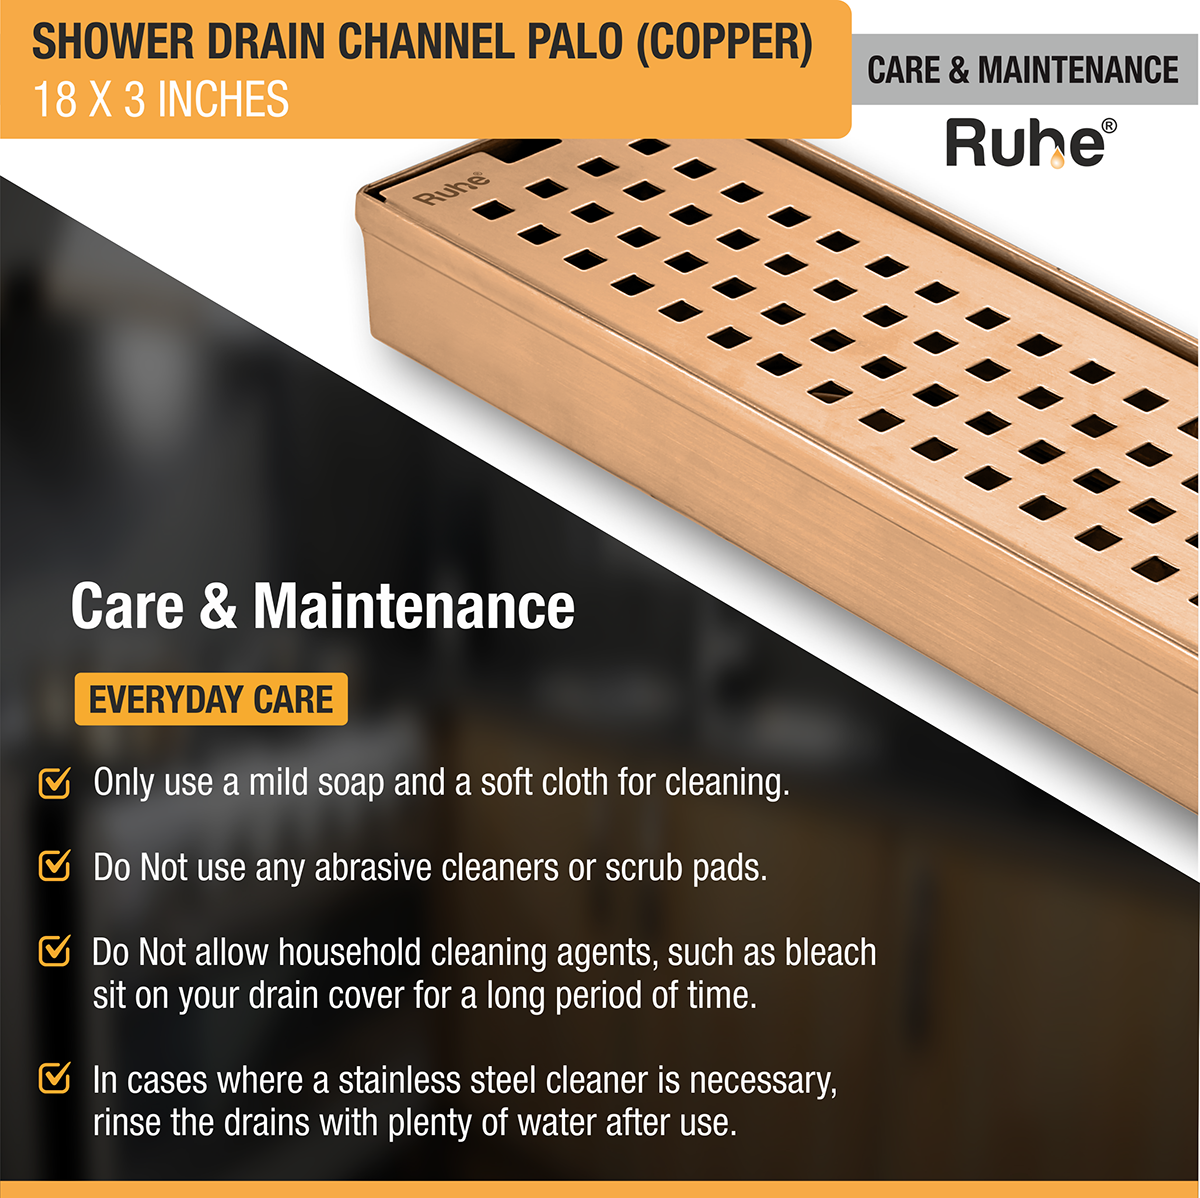 Palo Shower Drain Channel (18 x 3 Inches) ROSE GOLD/ANTIQUE COPPER care and maintenance